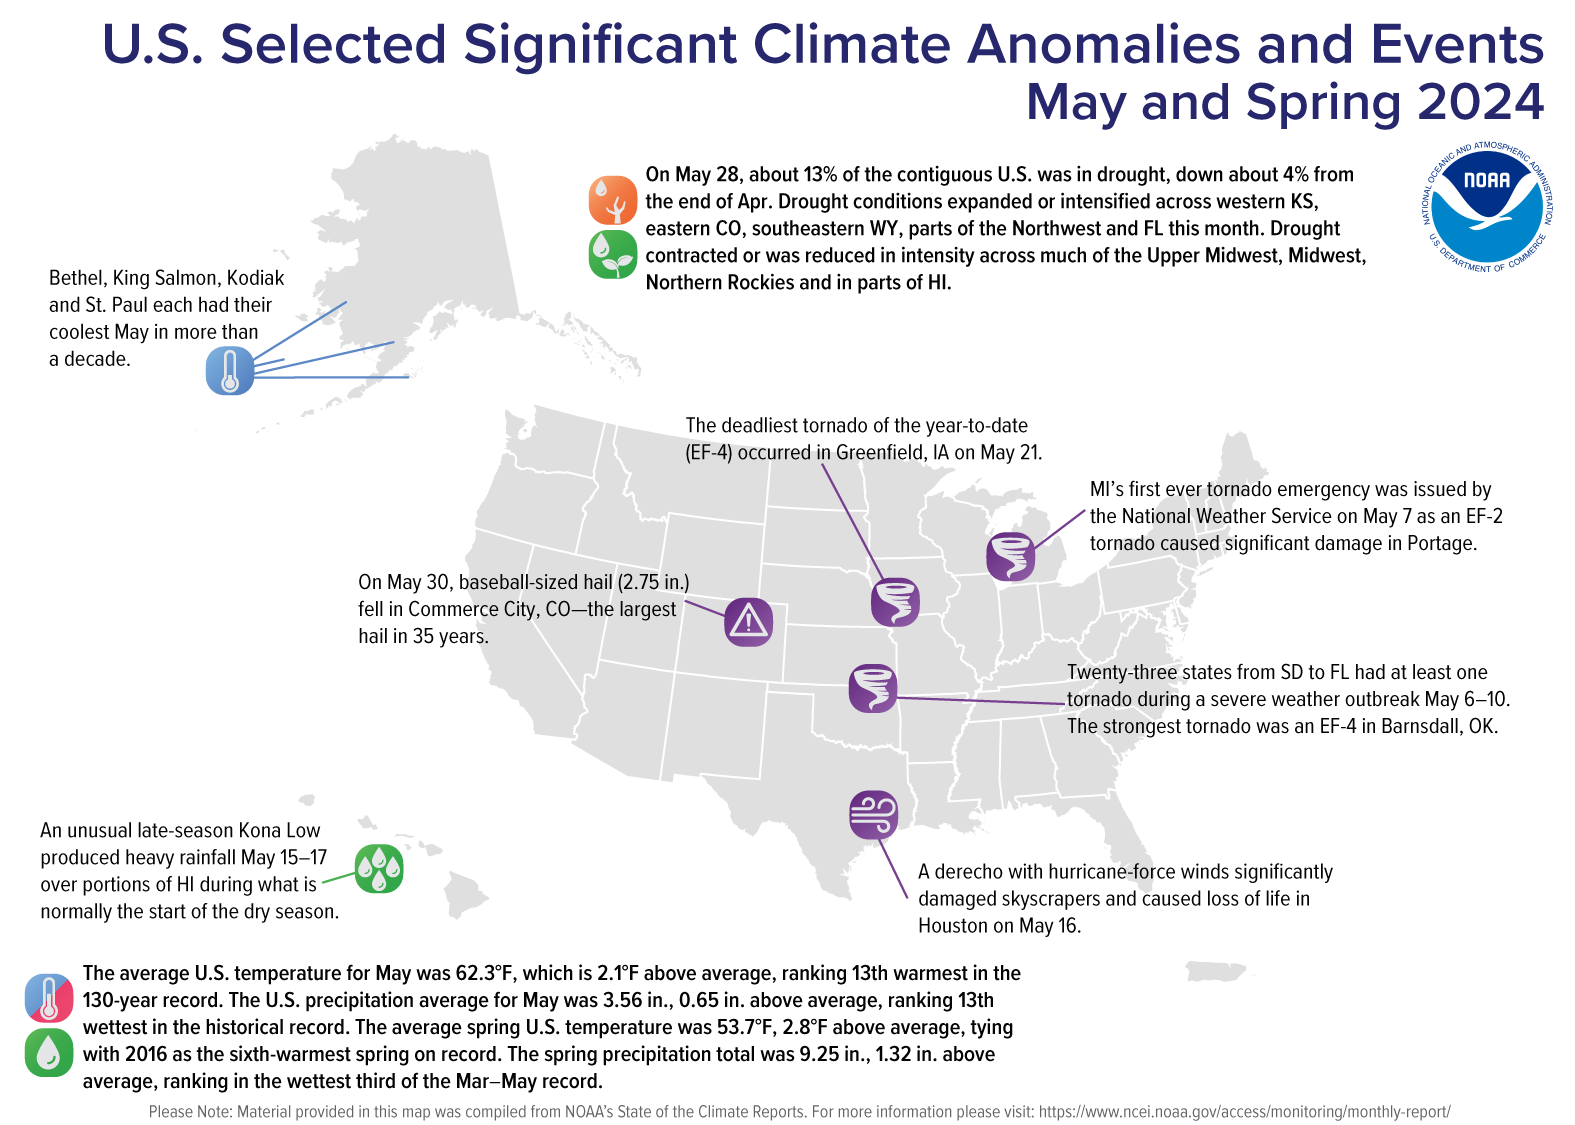 A map of the U.S. plotted with significant climate events that occurred during May 2024. See more details in the report summary from NOAA NCEI at  http://bit.ly/USClimate202405.